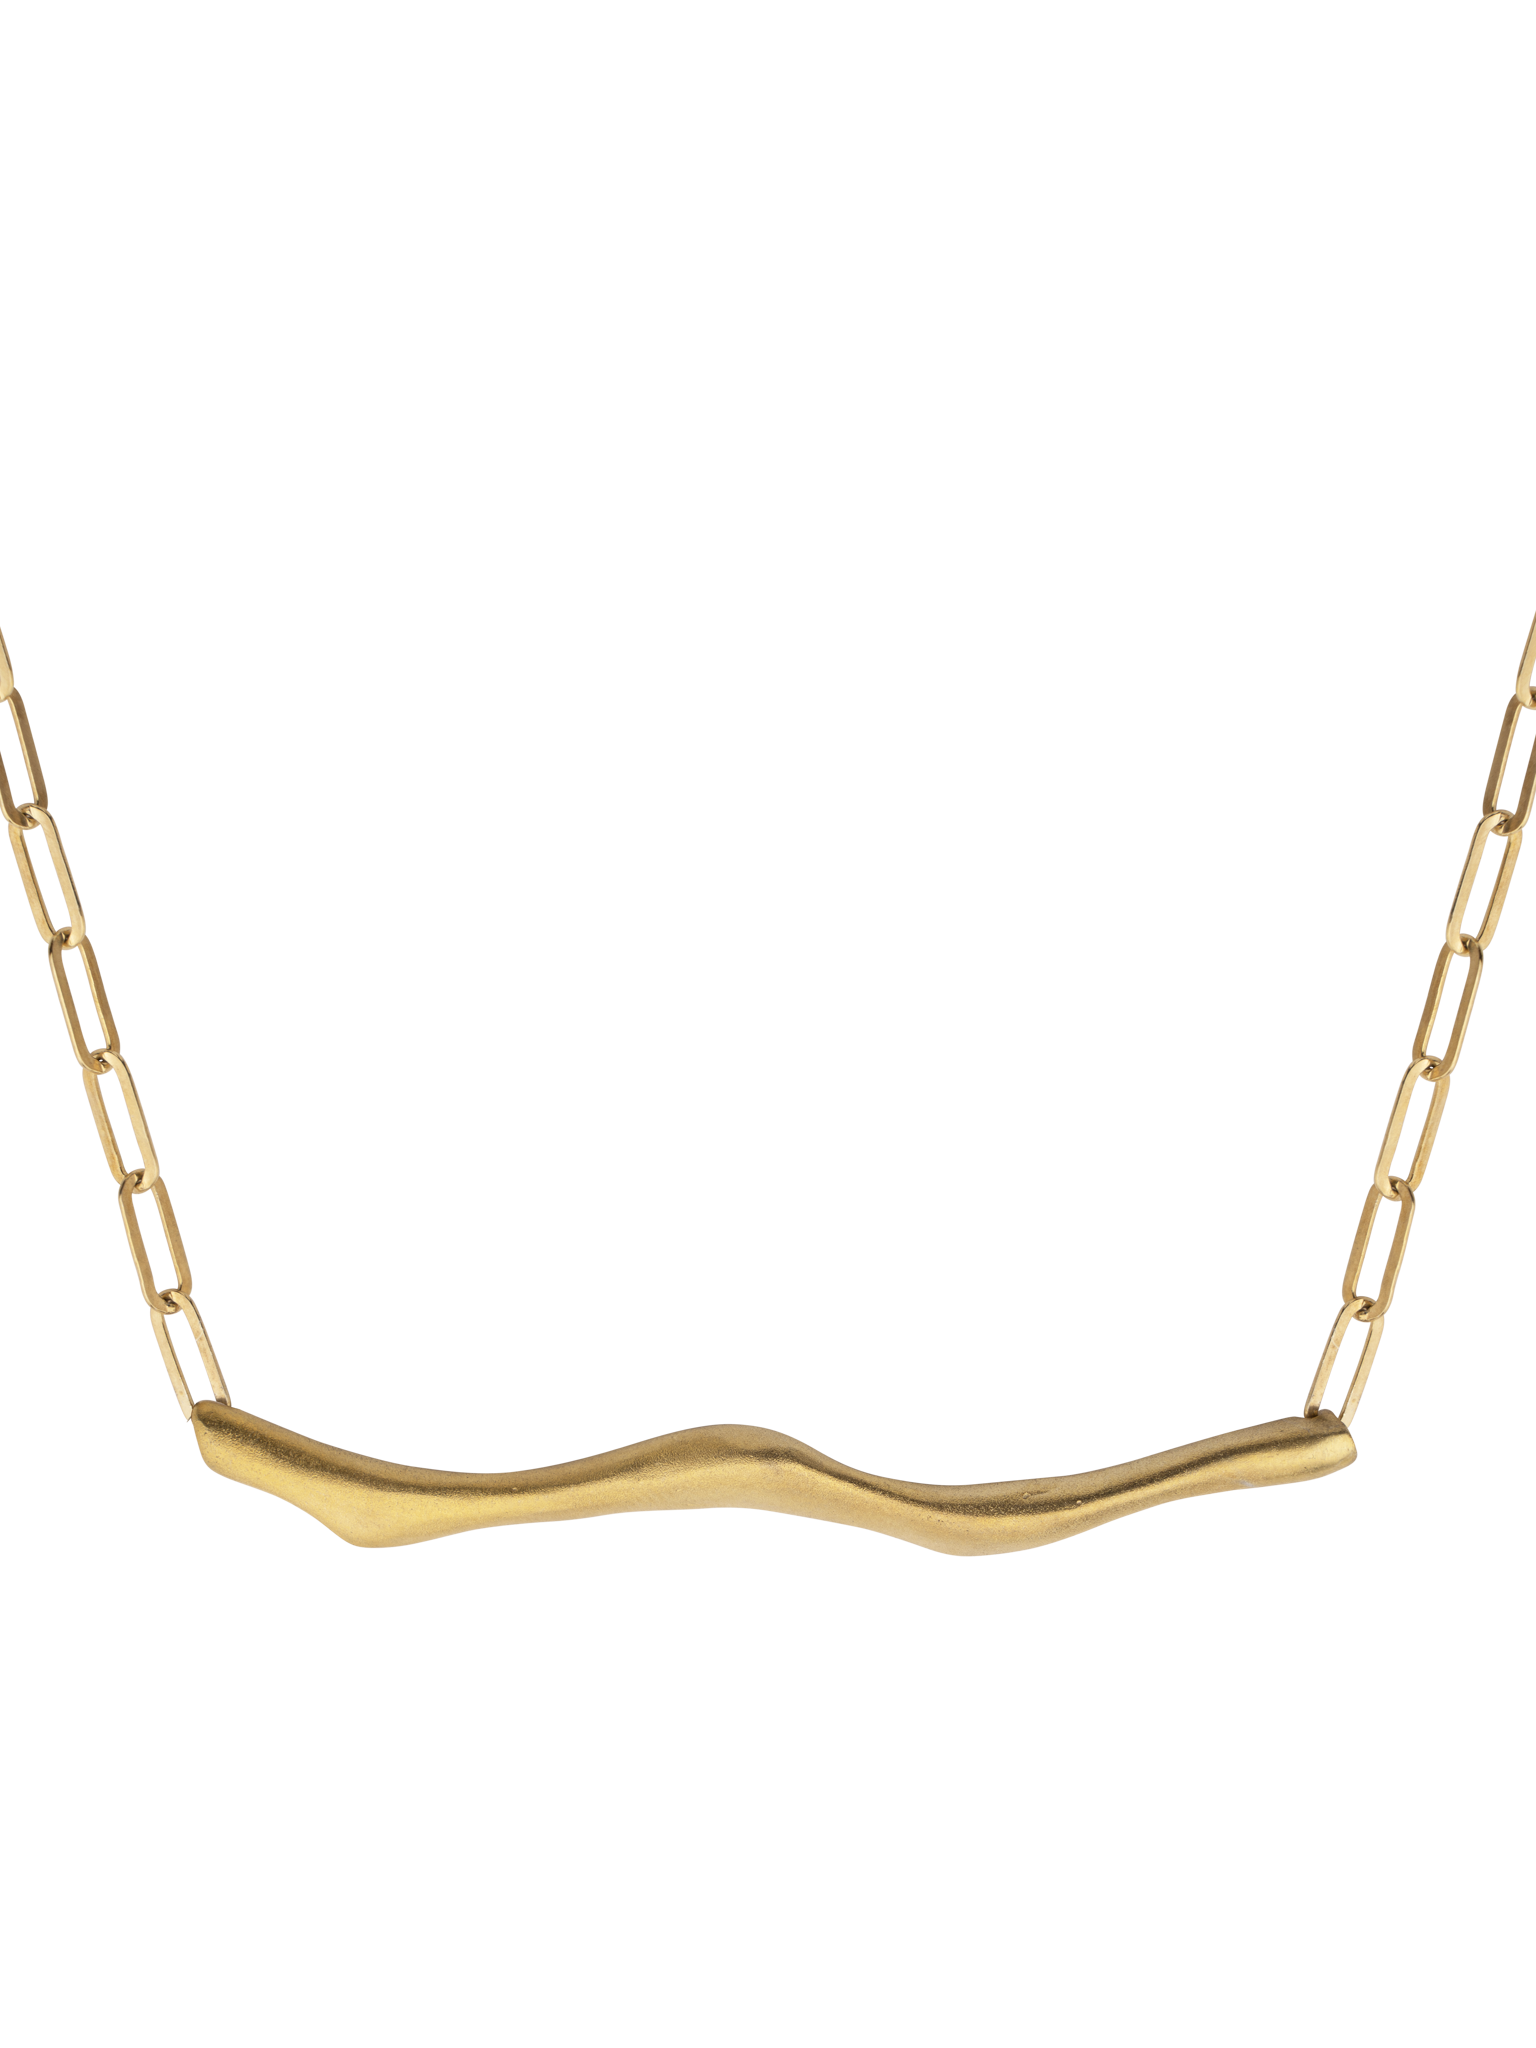 Coral branch necklace